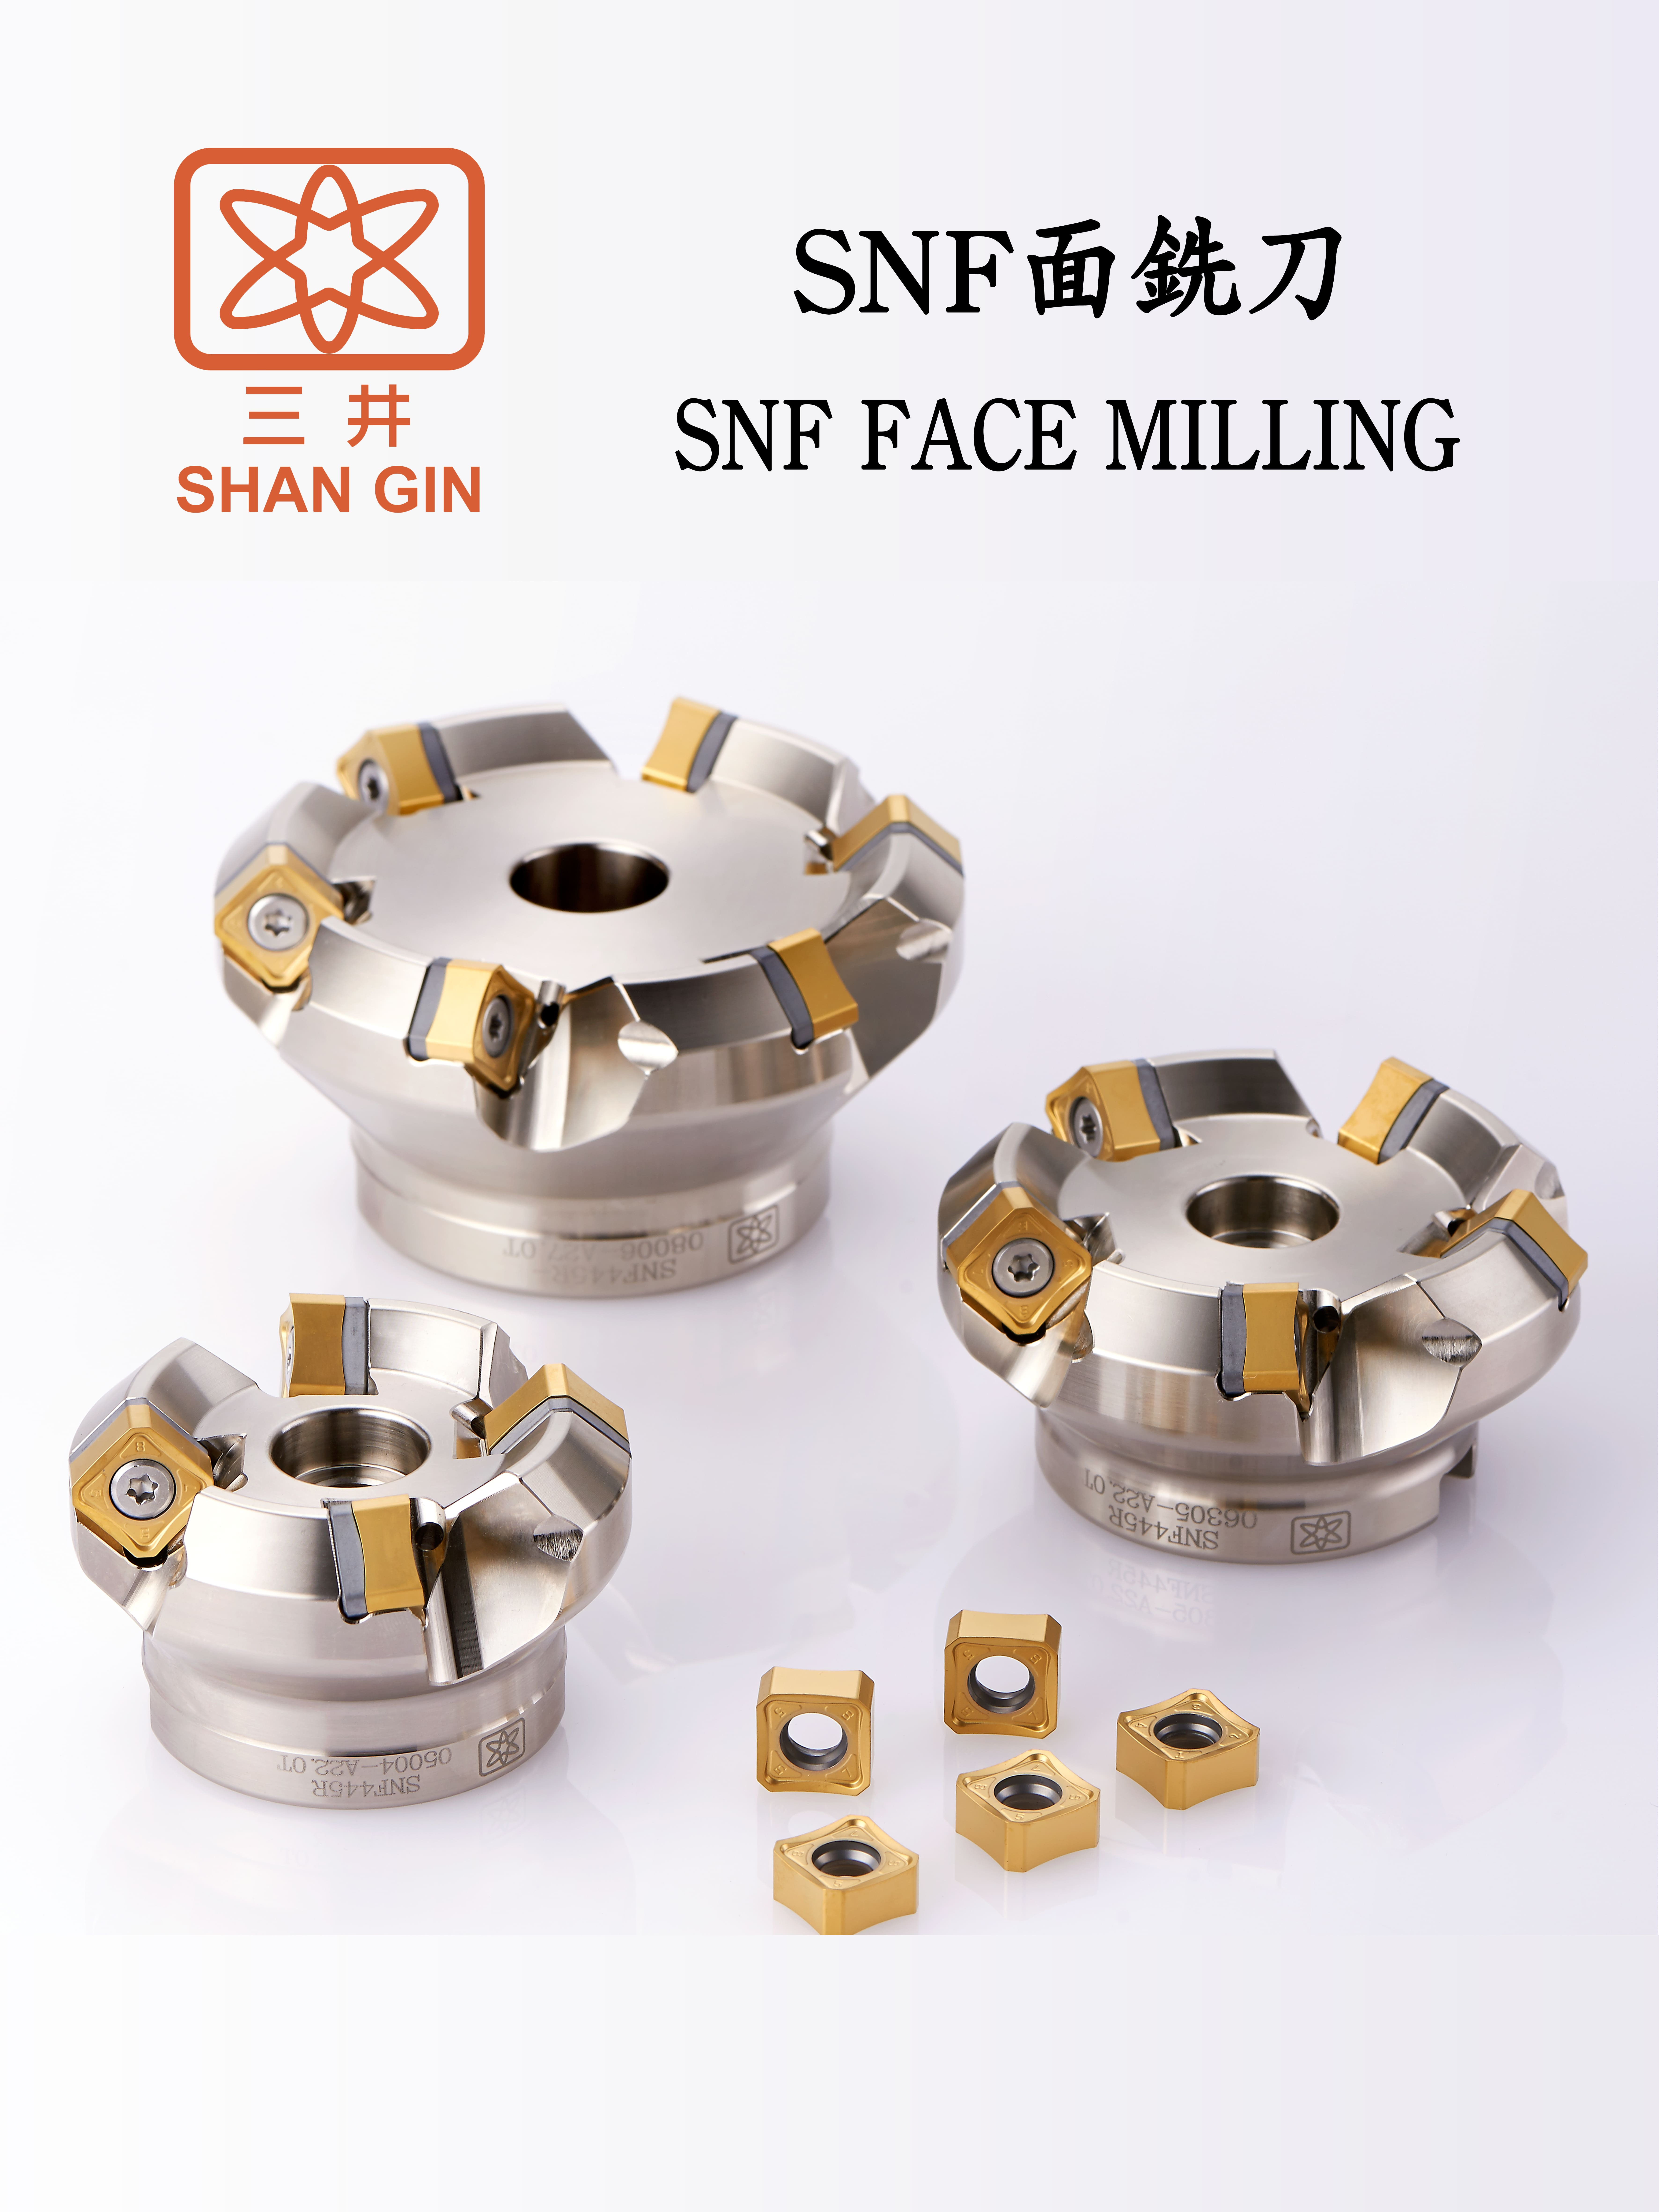 Catalog|SNF FACE MILLING